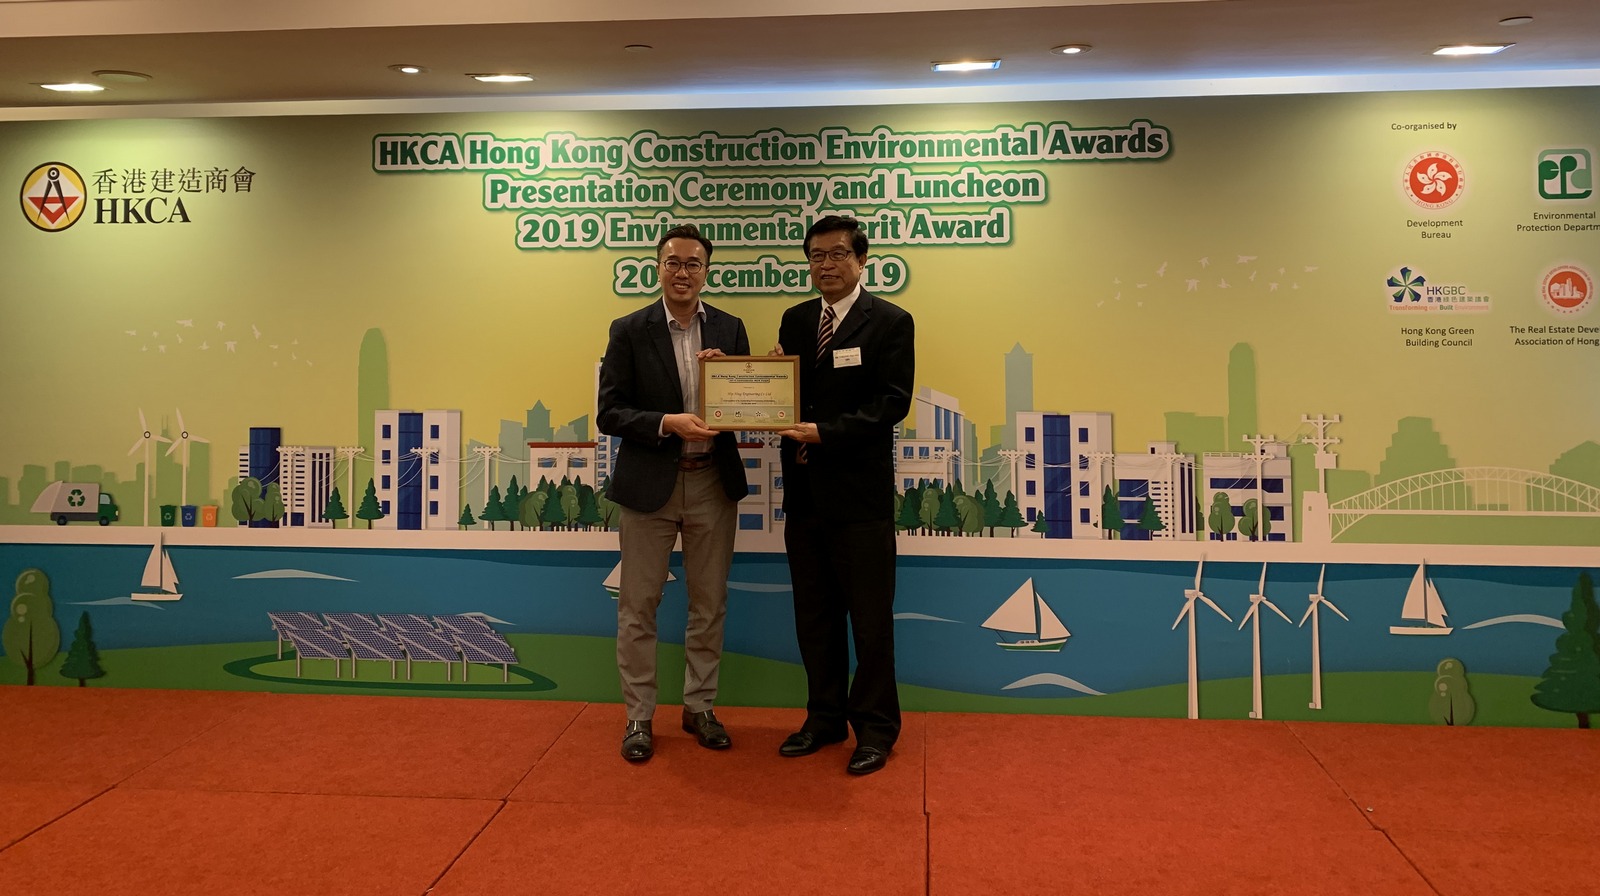 Hip Hing's environmental efforts has been recognised